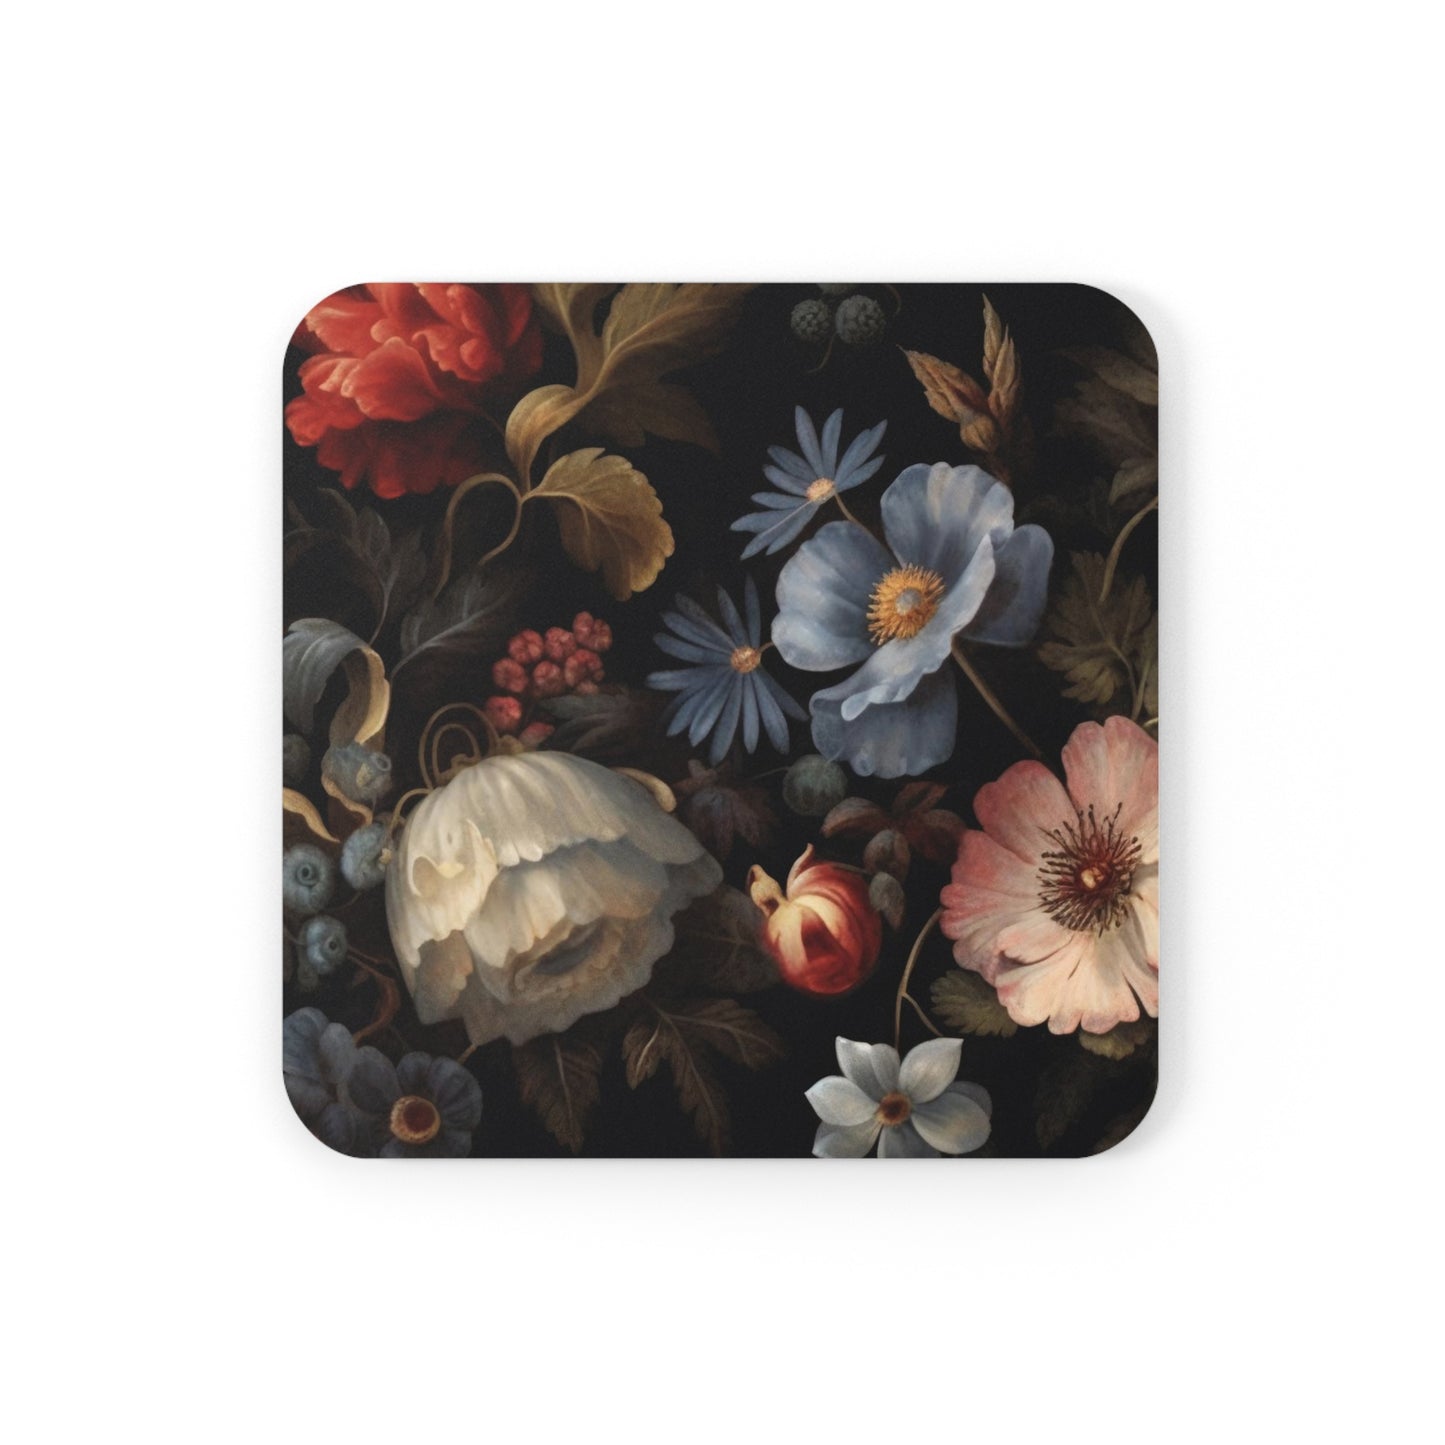 Dark Cottagecore Flowers Coaster Set of 4, Floral Coffee Cup Mats, Vintage Aesthetic Coffee Table Decor, Housewarming Gift, Gift for Her